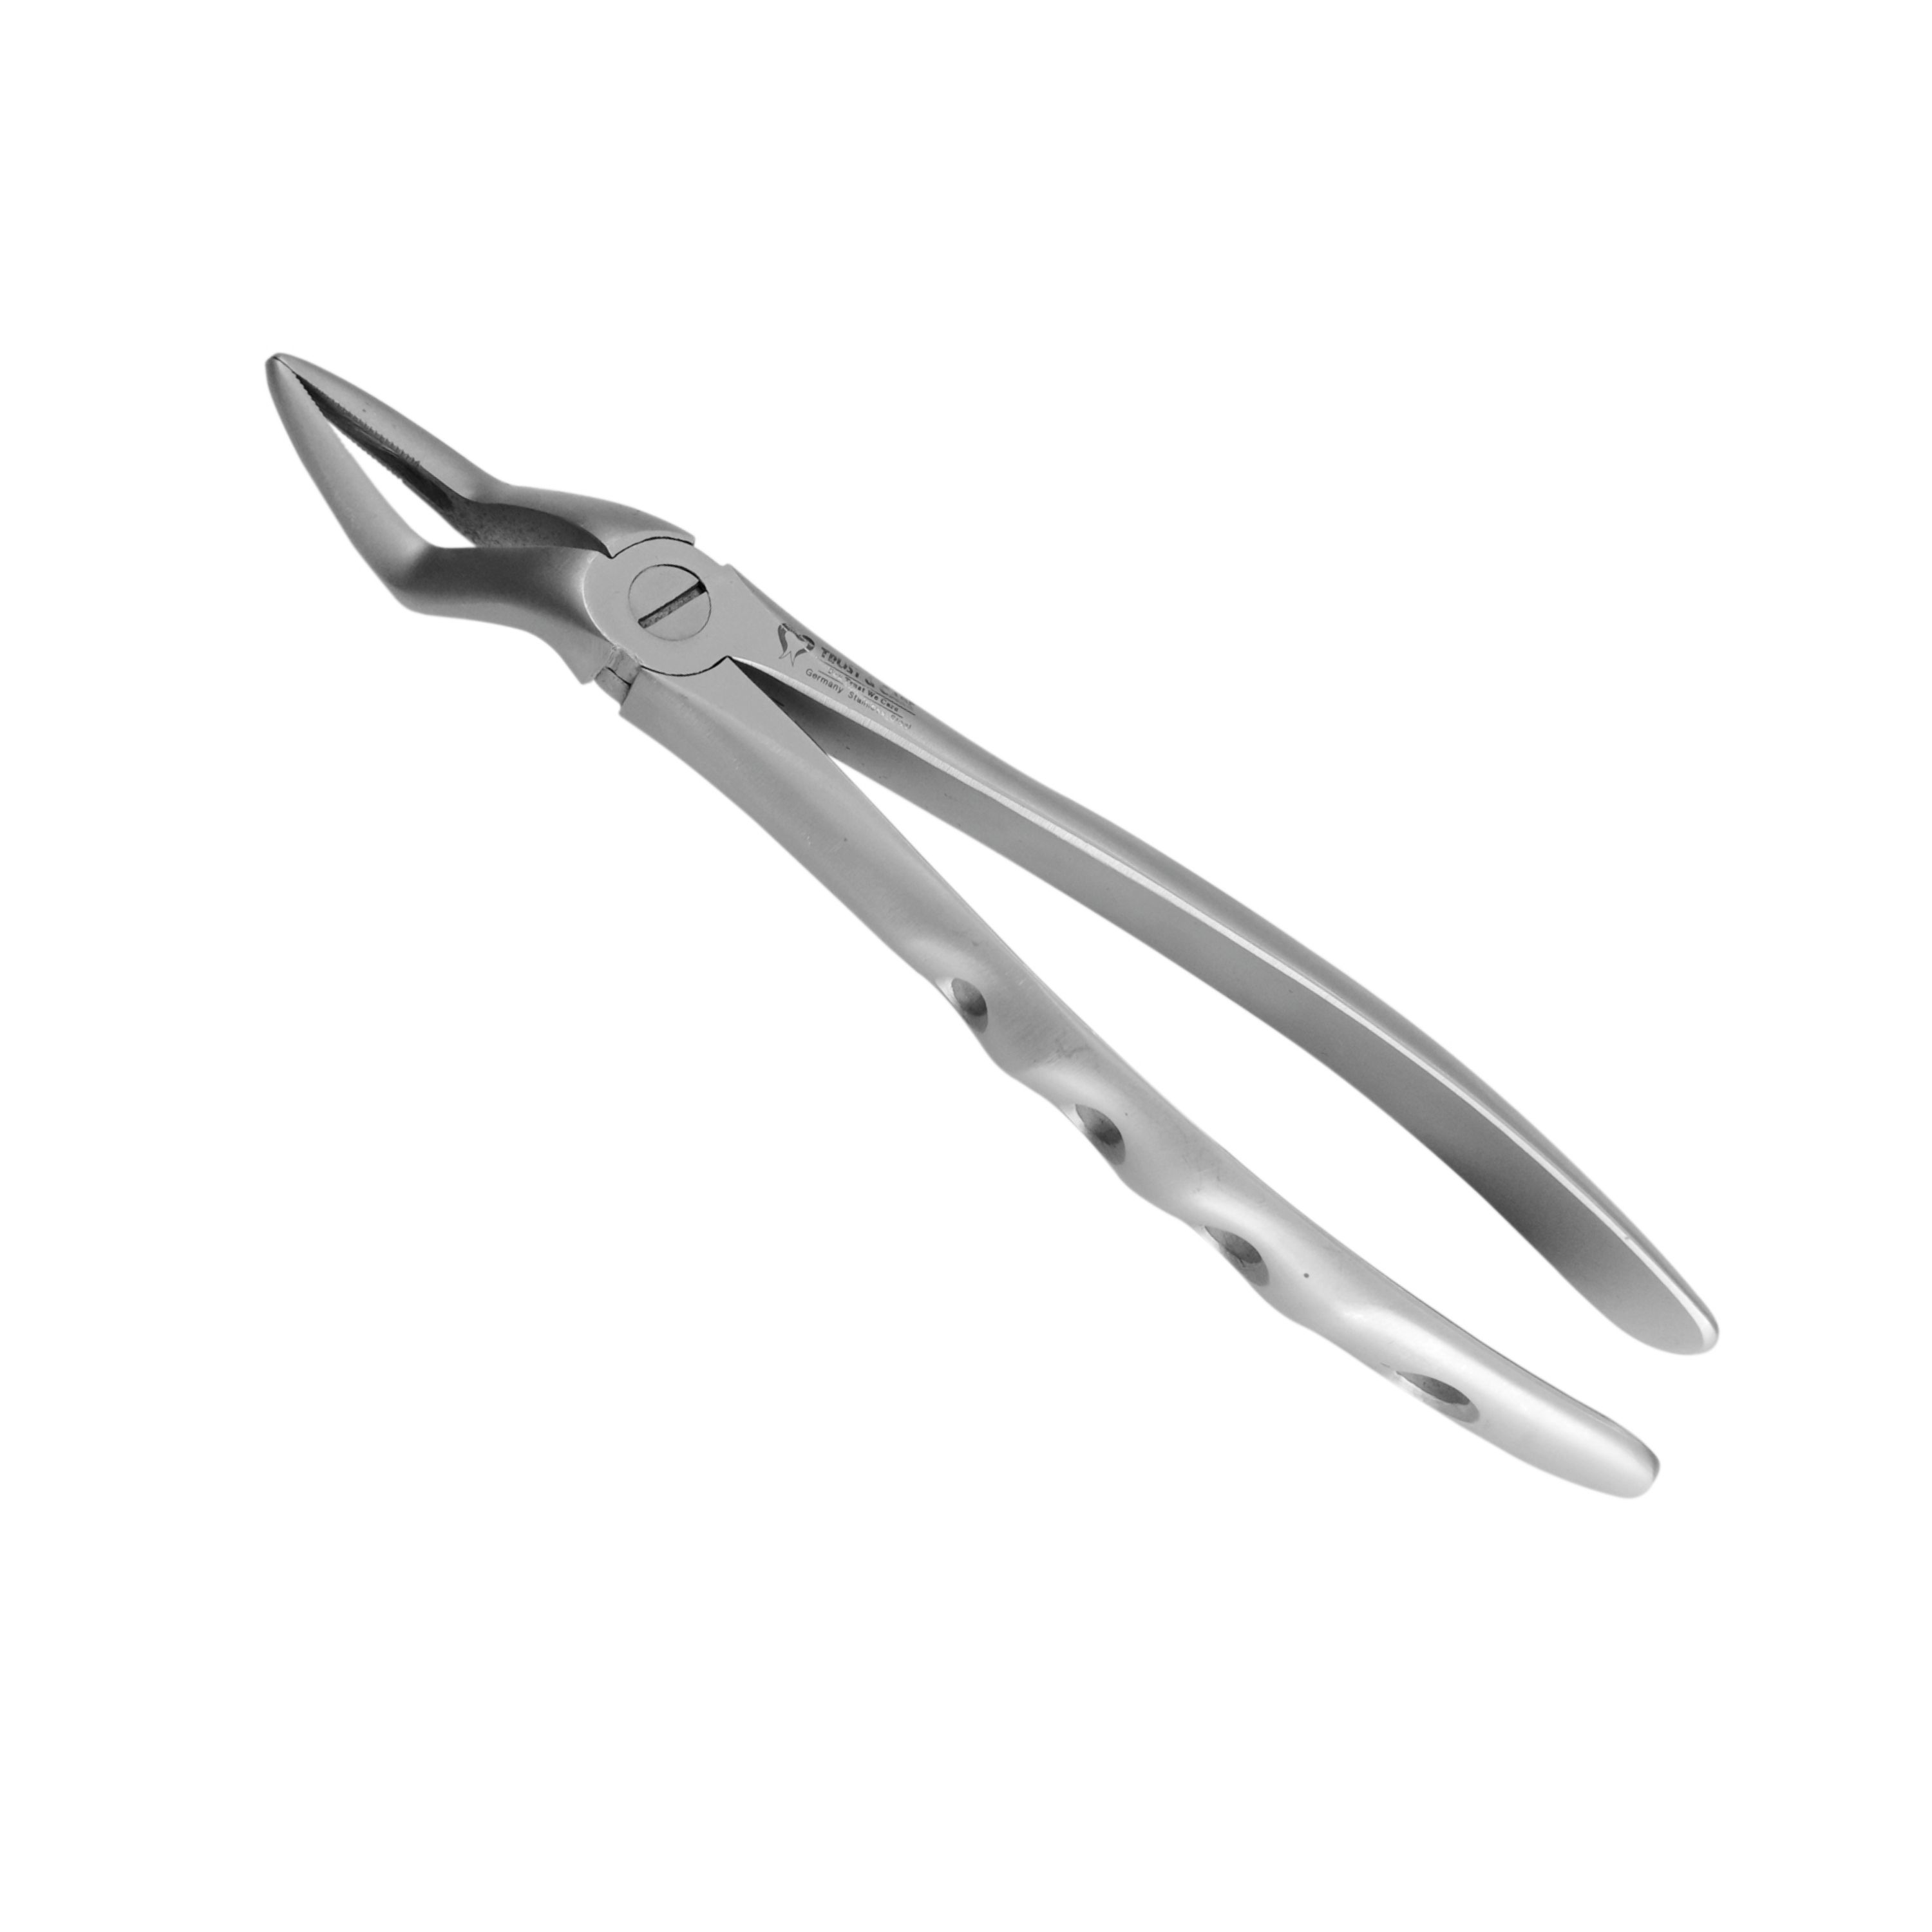 Trust & Care Tooth Extraction Forcep Upper Roots Fig No. 51 Premium